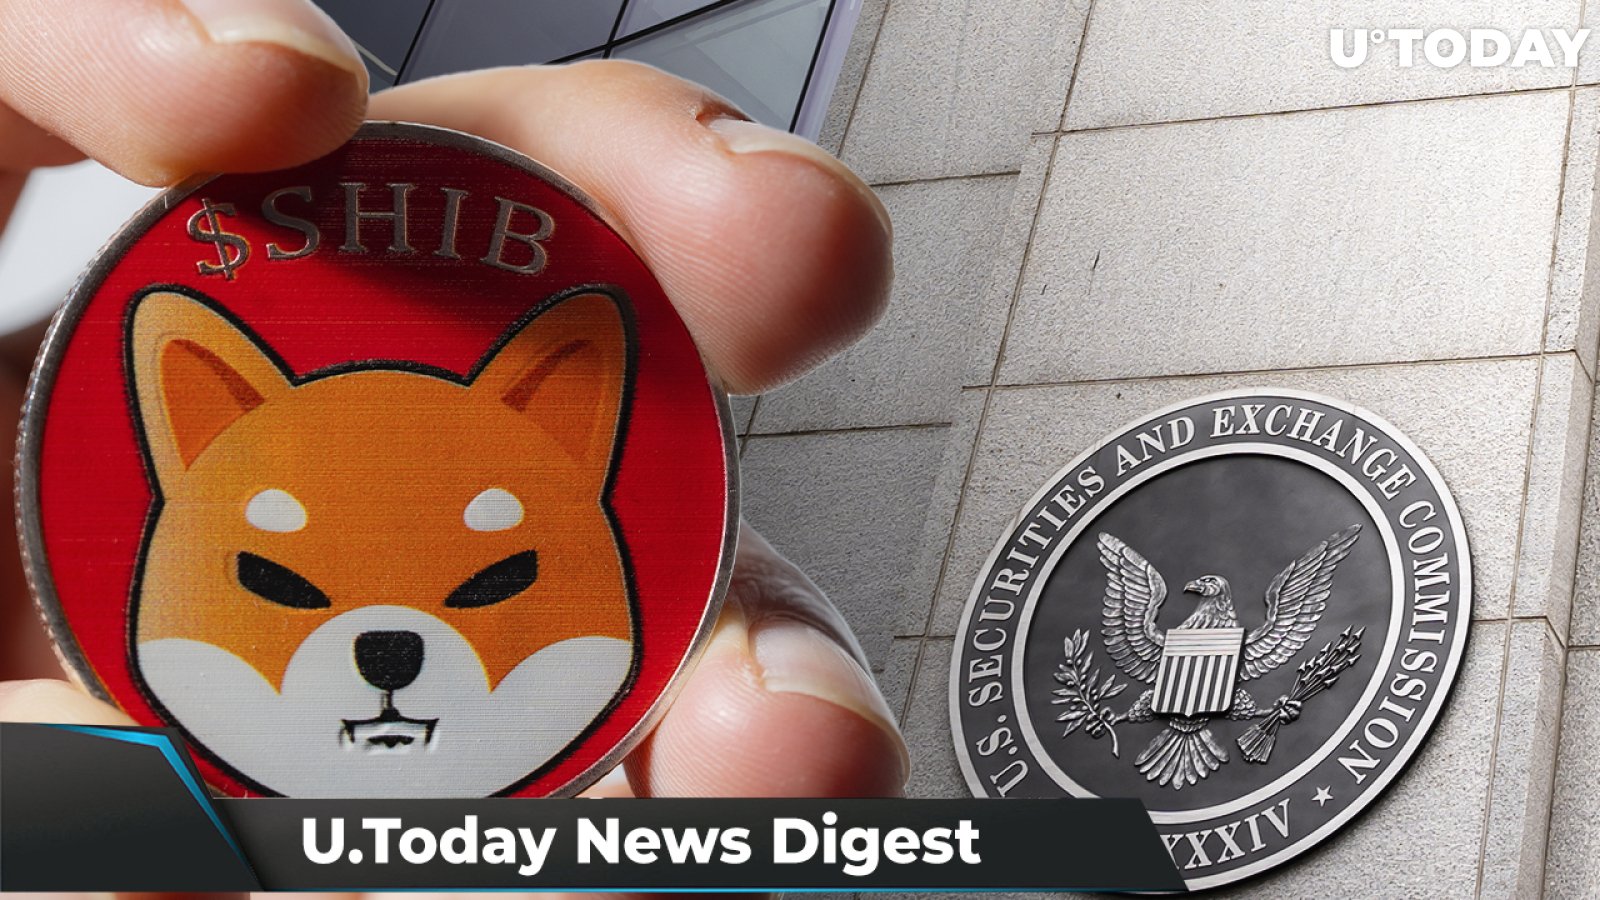 SEC Scores Minor Win Against Ripple, DeFi Exchange Lists SHIB, Cardano’s Vasil Hardfork Details Shared: Crypto News Digest by U.Today